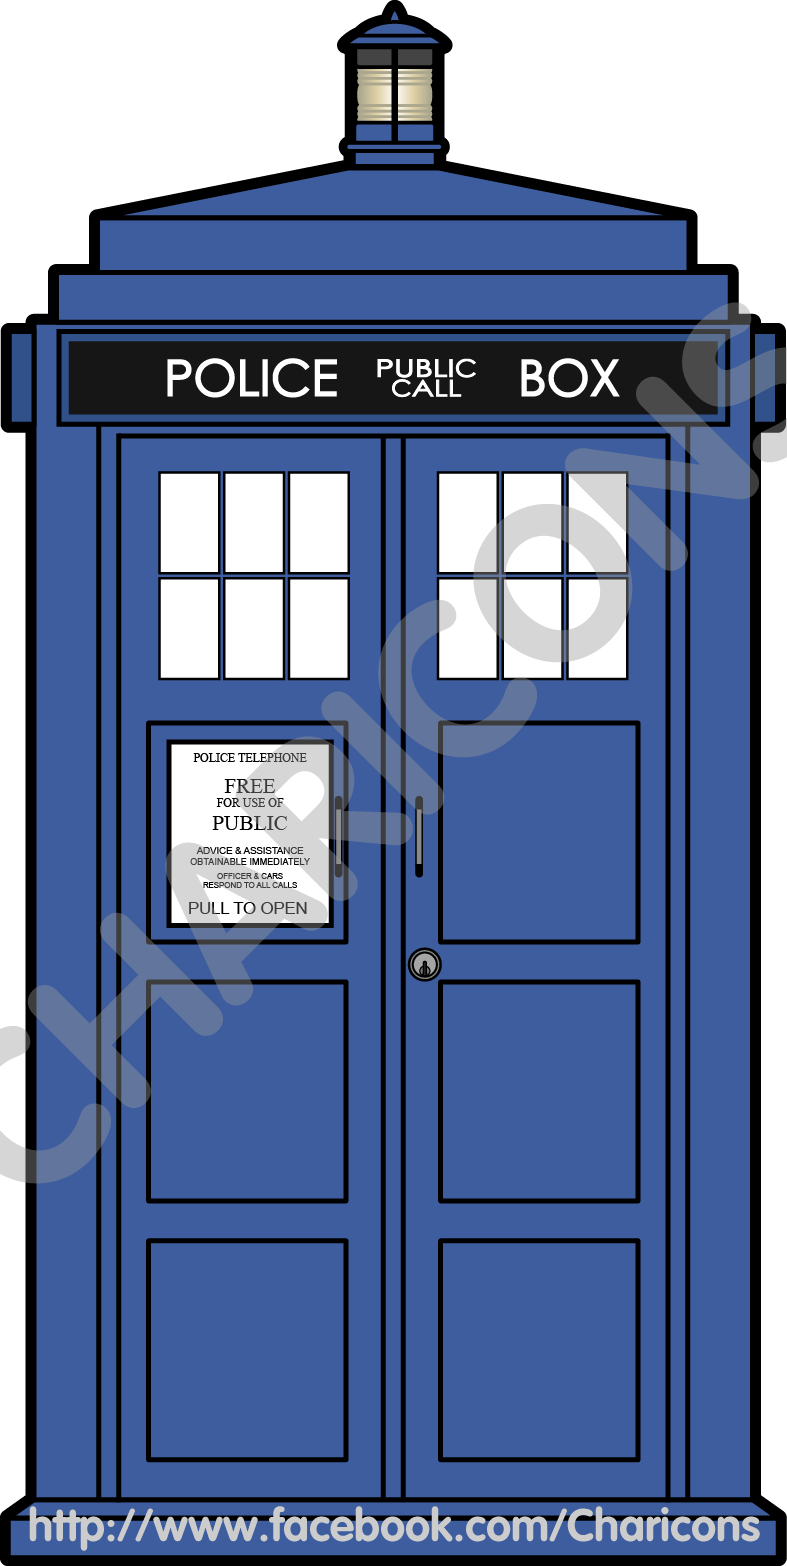 Doctor Who Tardis Charicon by geekeboy on DeviantArt